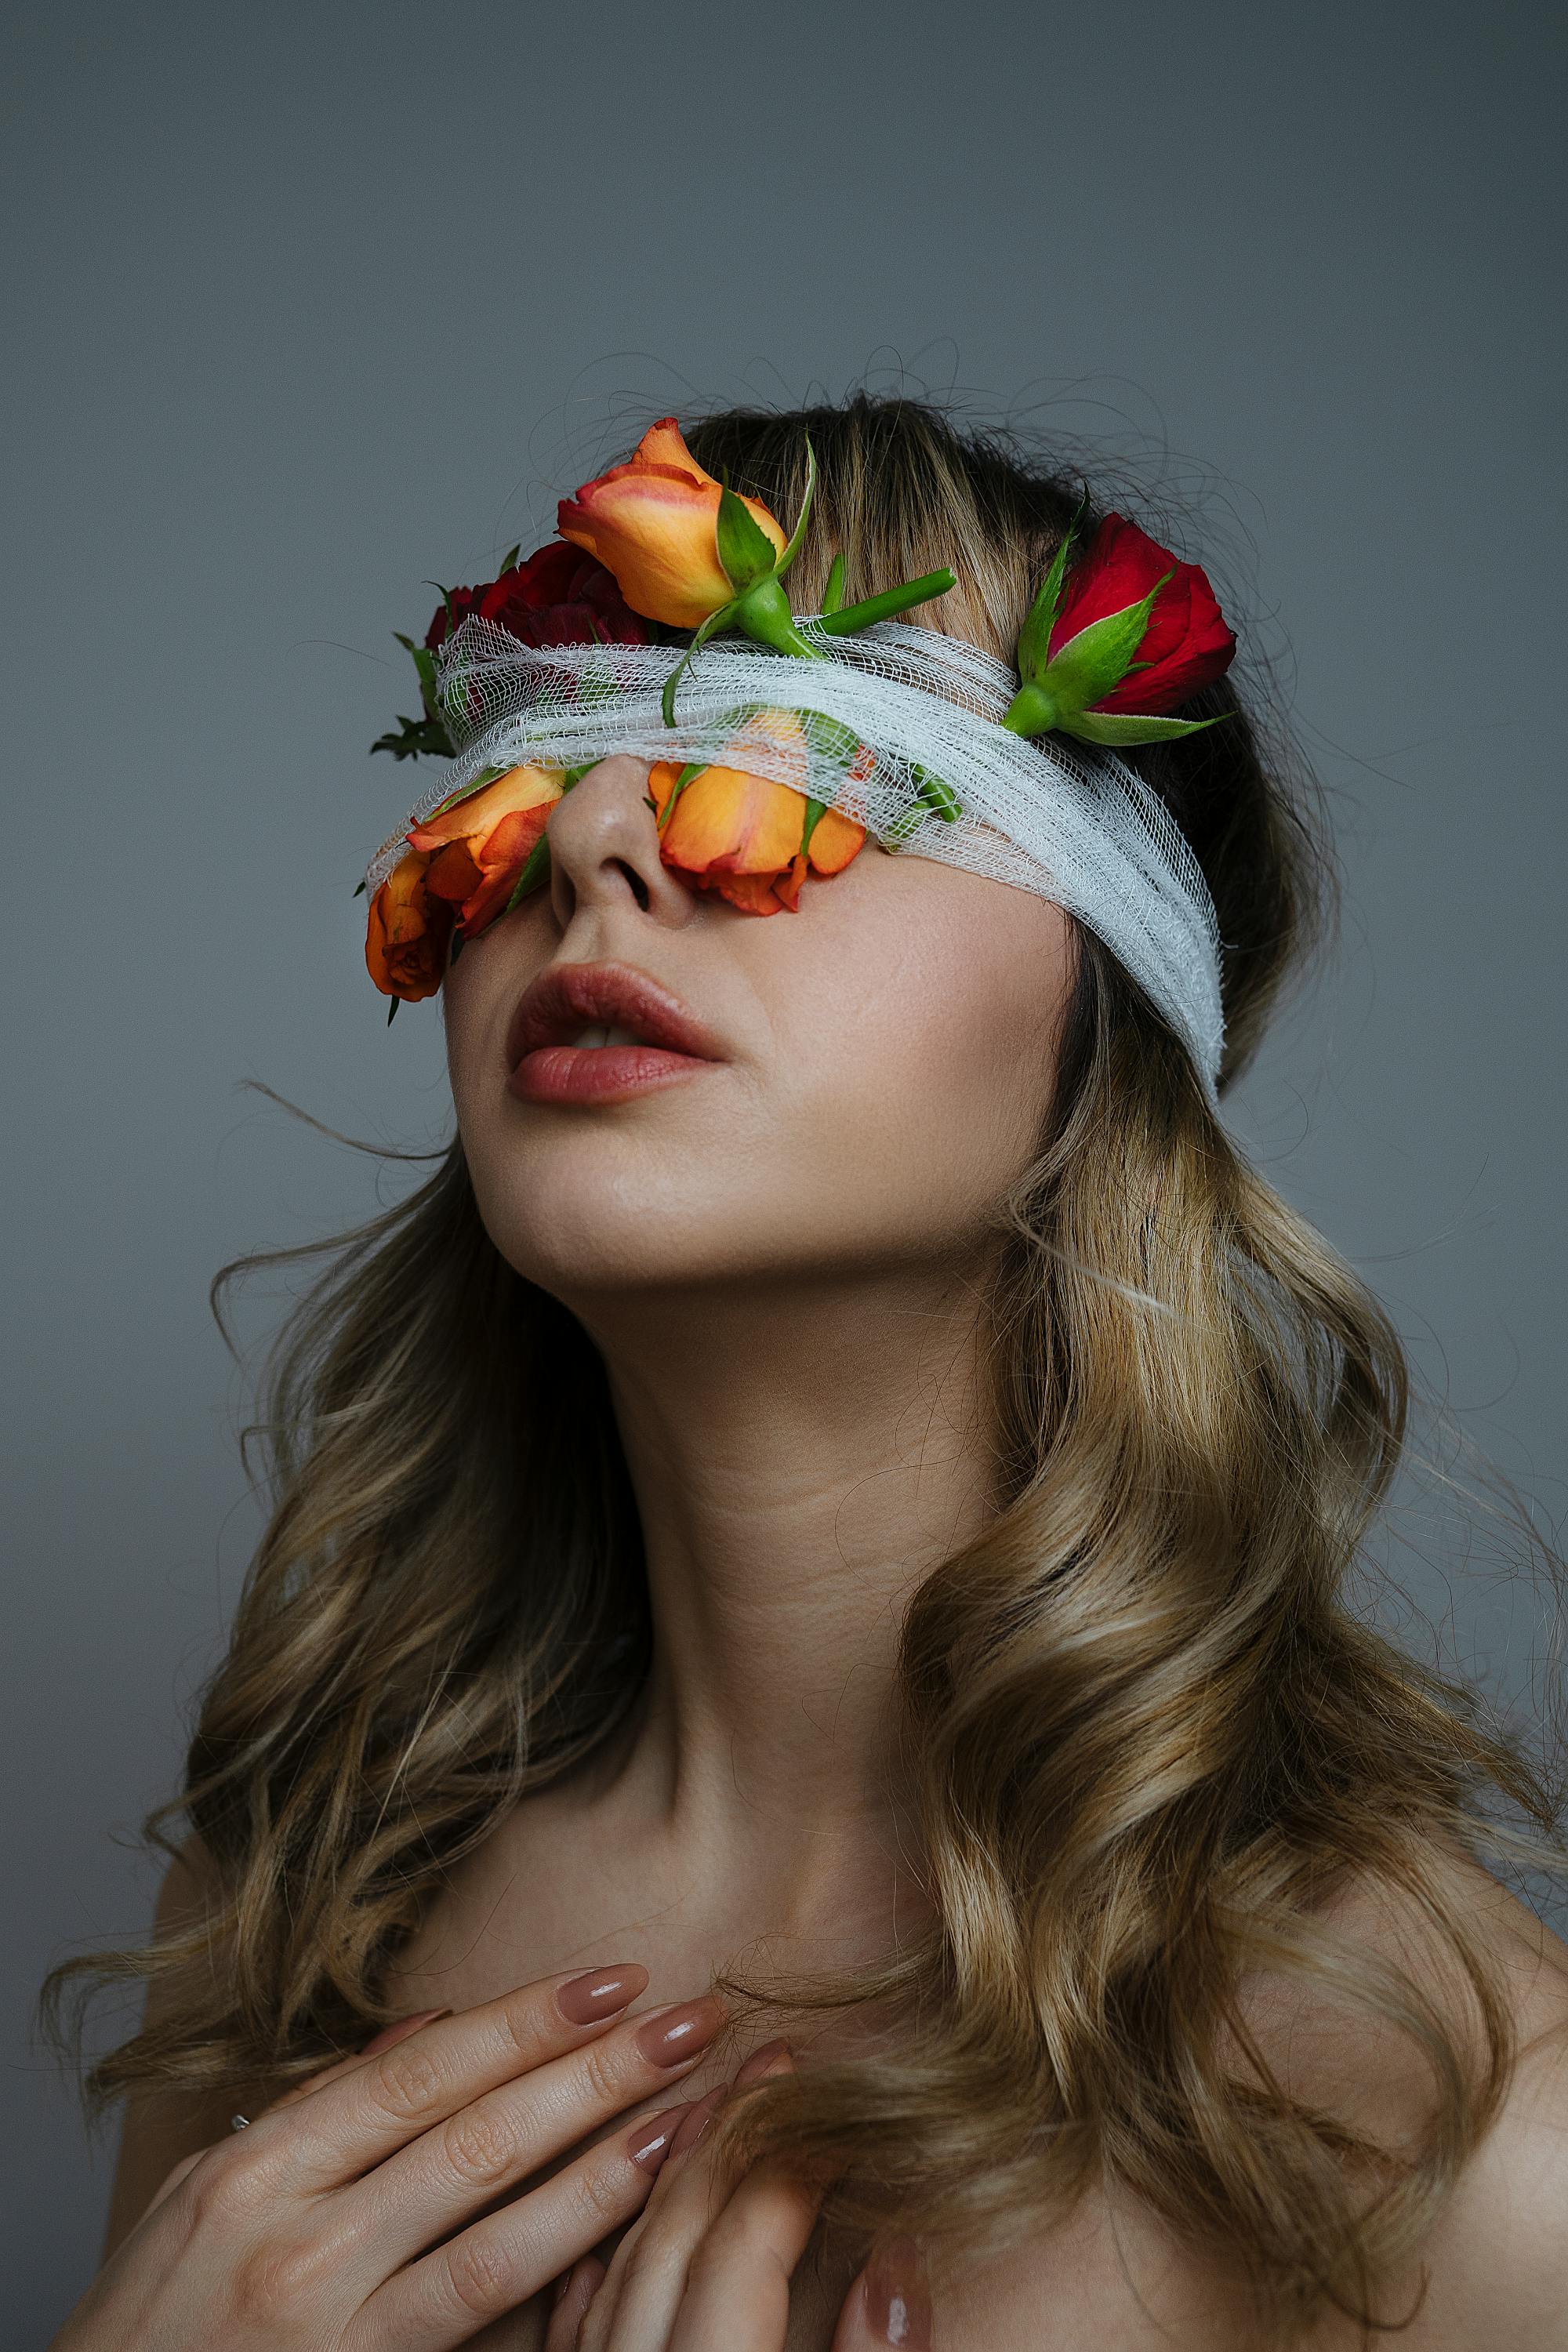 Blindfolded Images  Free Photos, PNG Stickers, Wallpapers